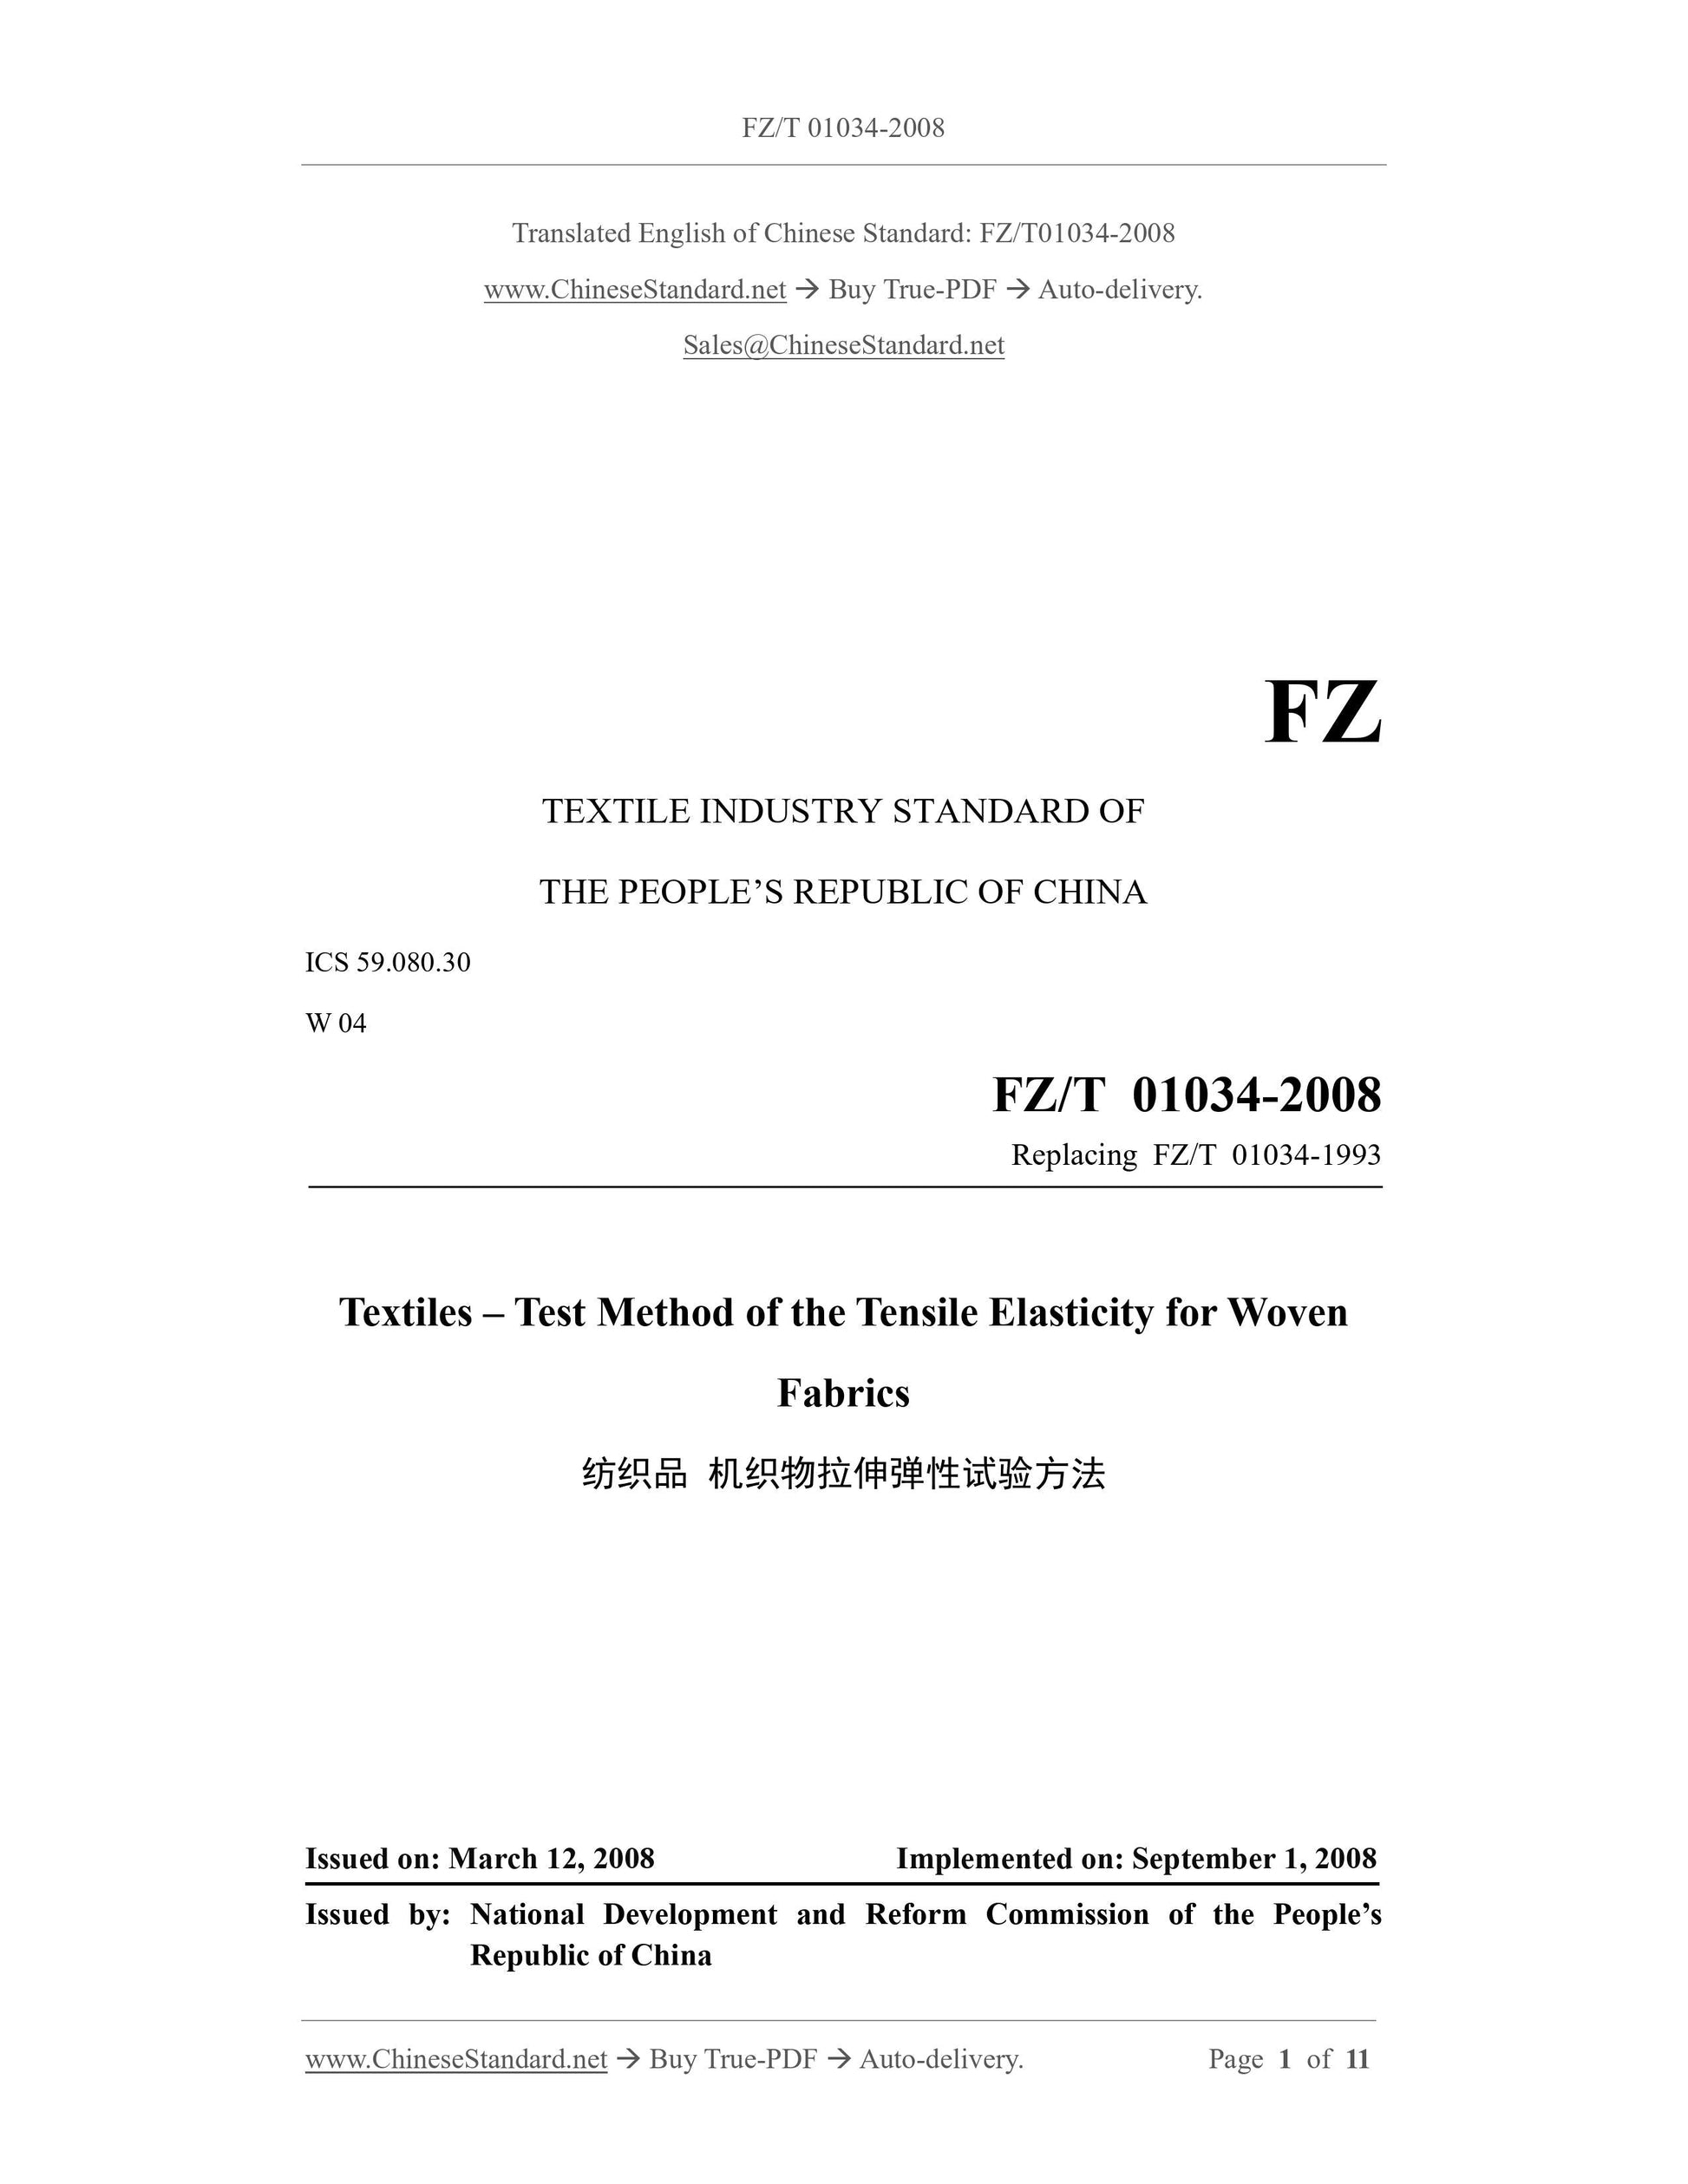 FZ/T 01034-2008 Page 1